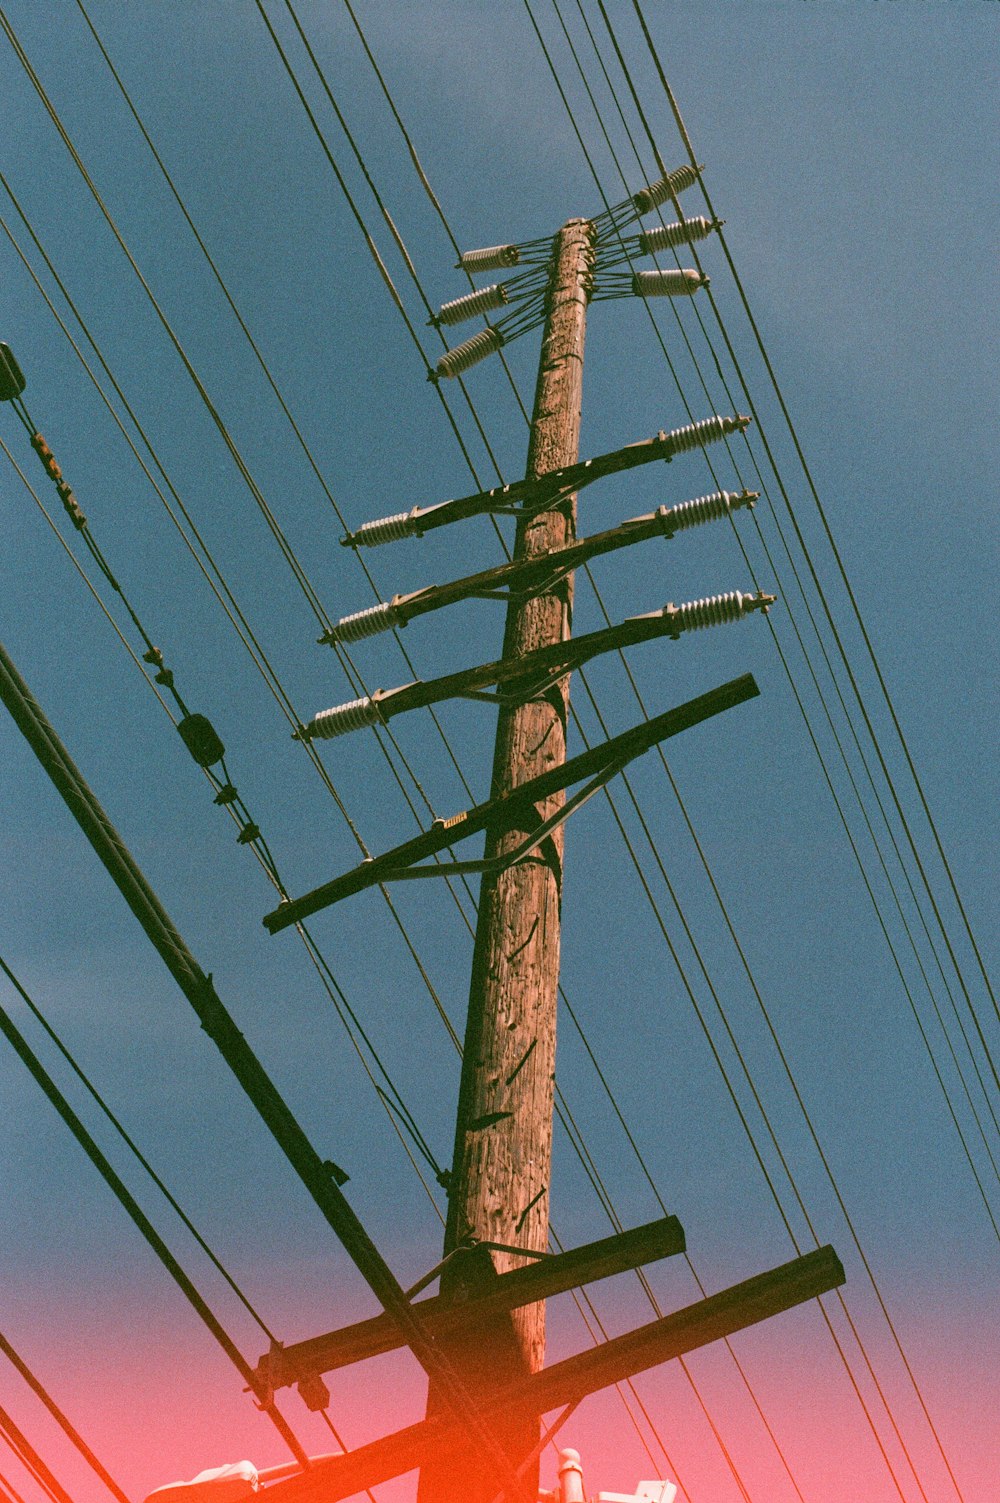 brown wooden electric post under blue sky during daytime